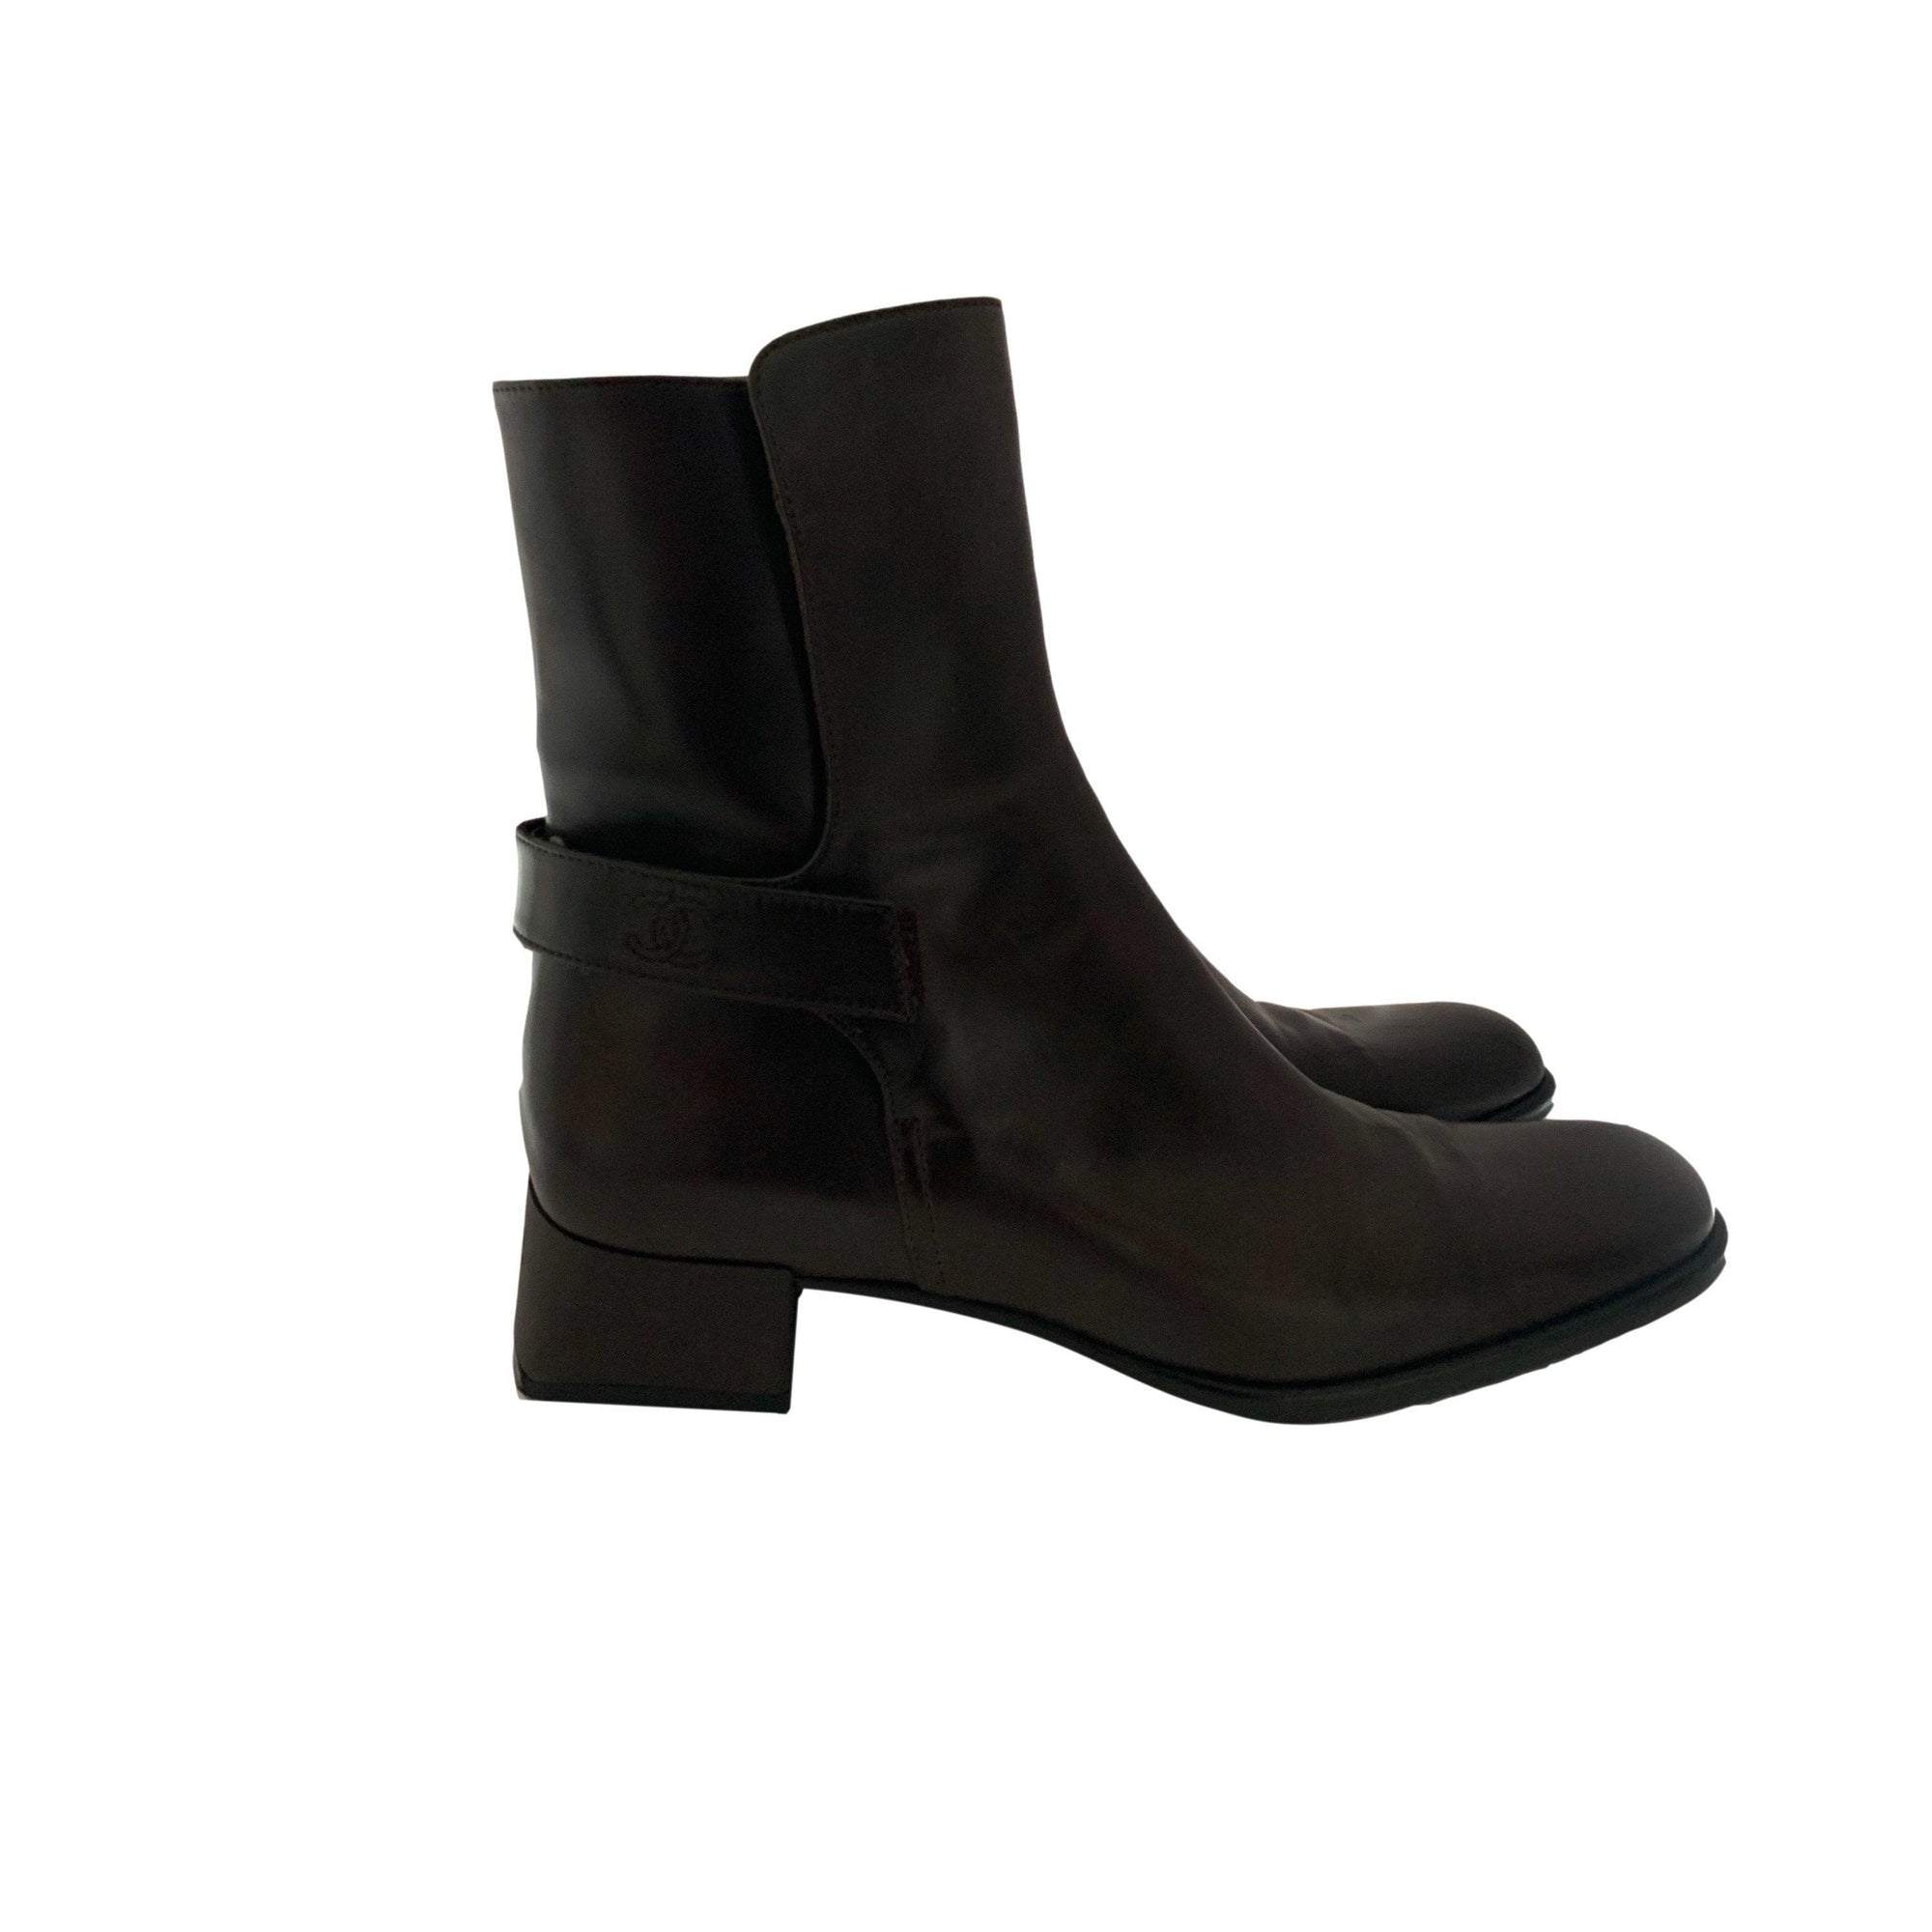 Chanel Dark Brown Leather Ankle Boots - Shoes